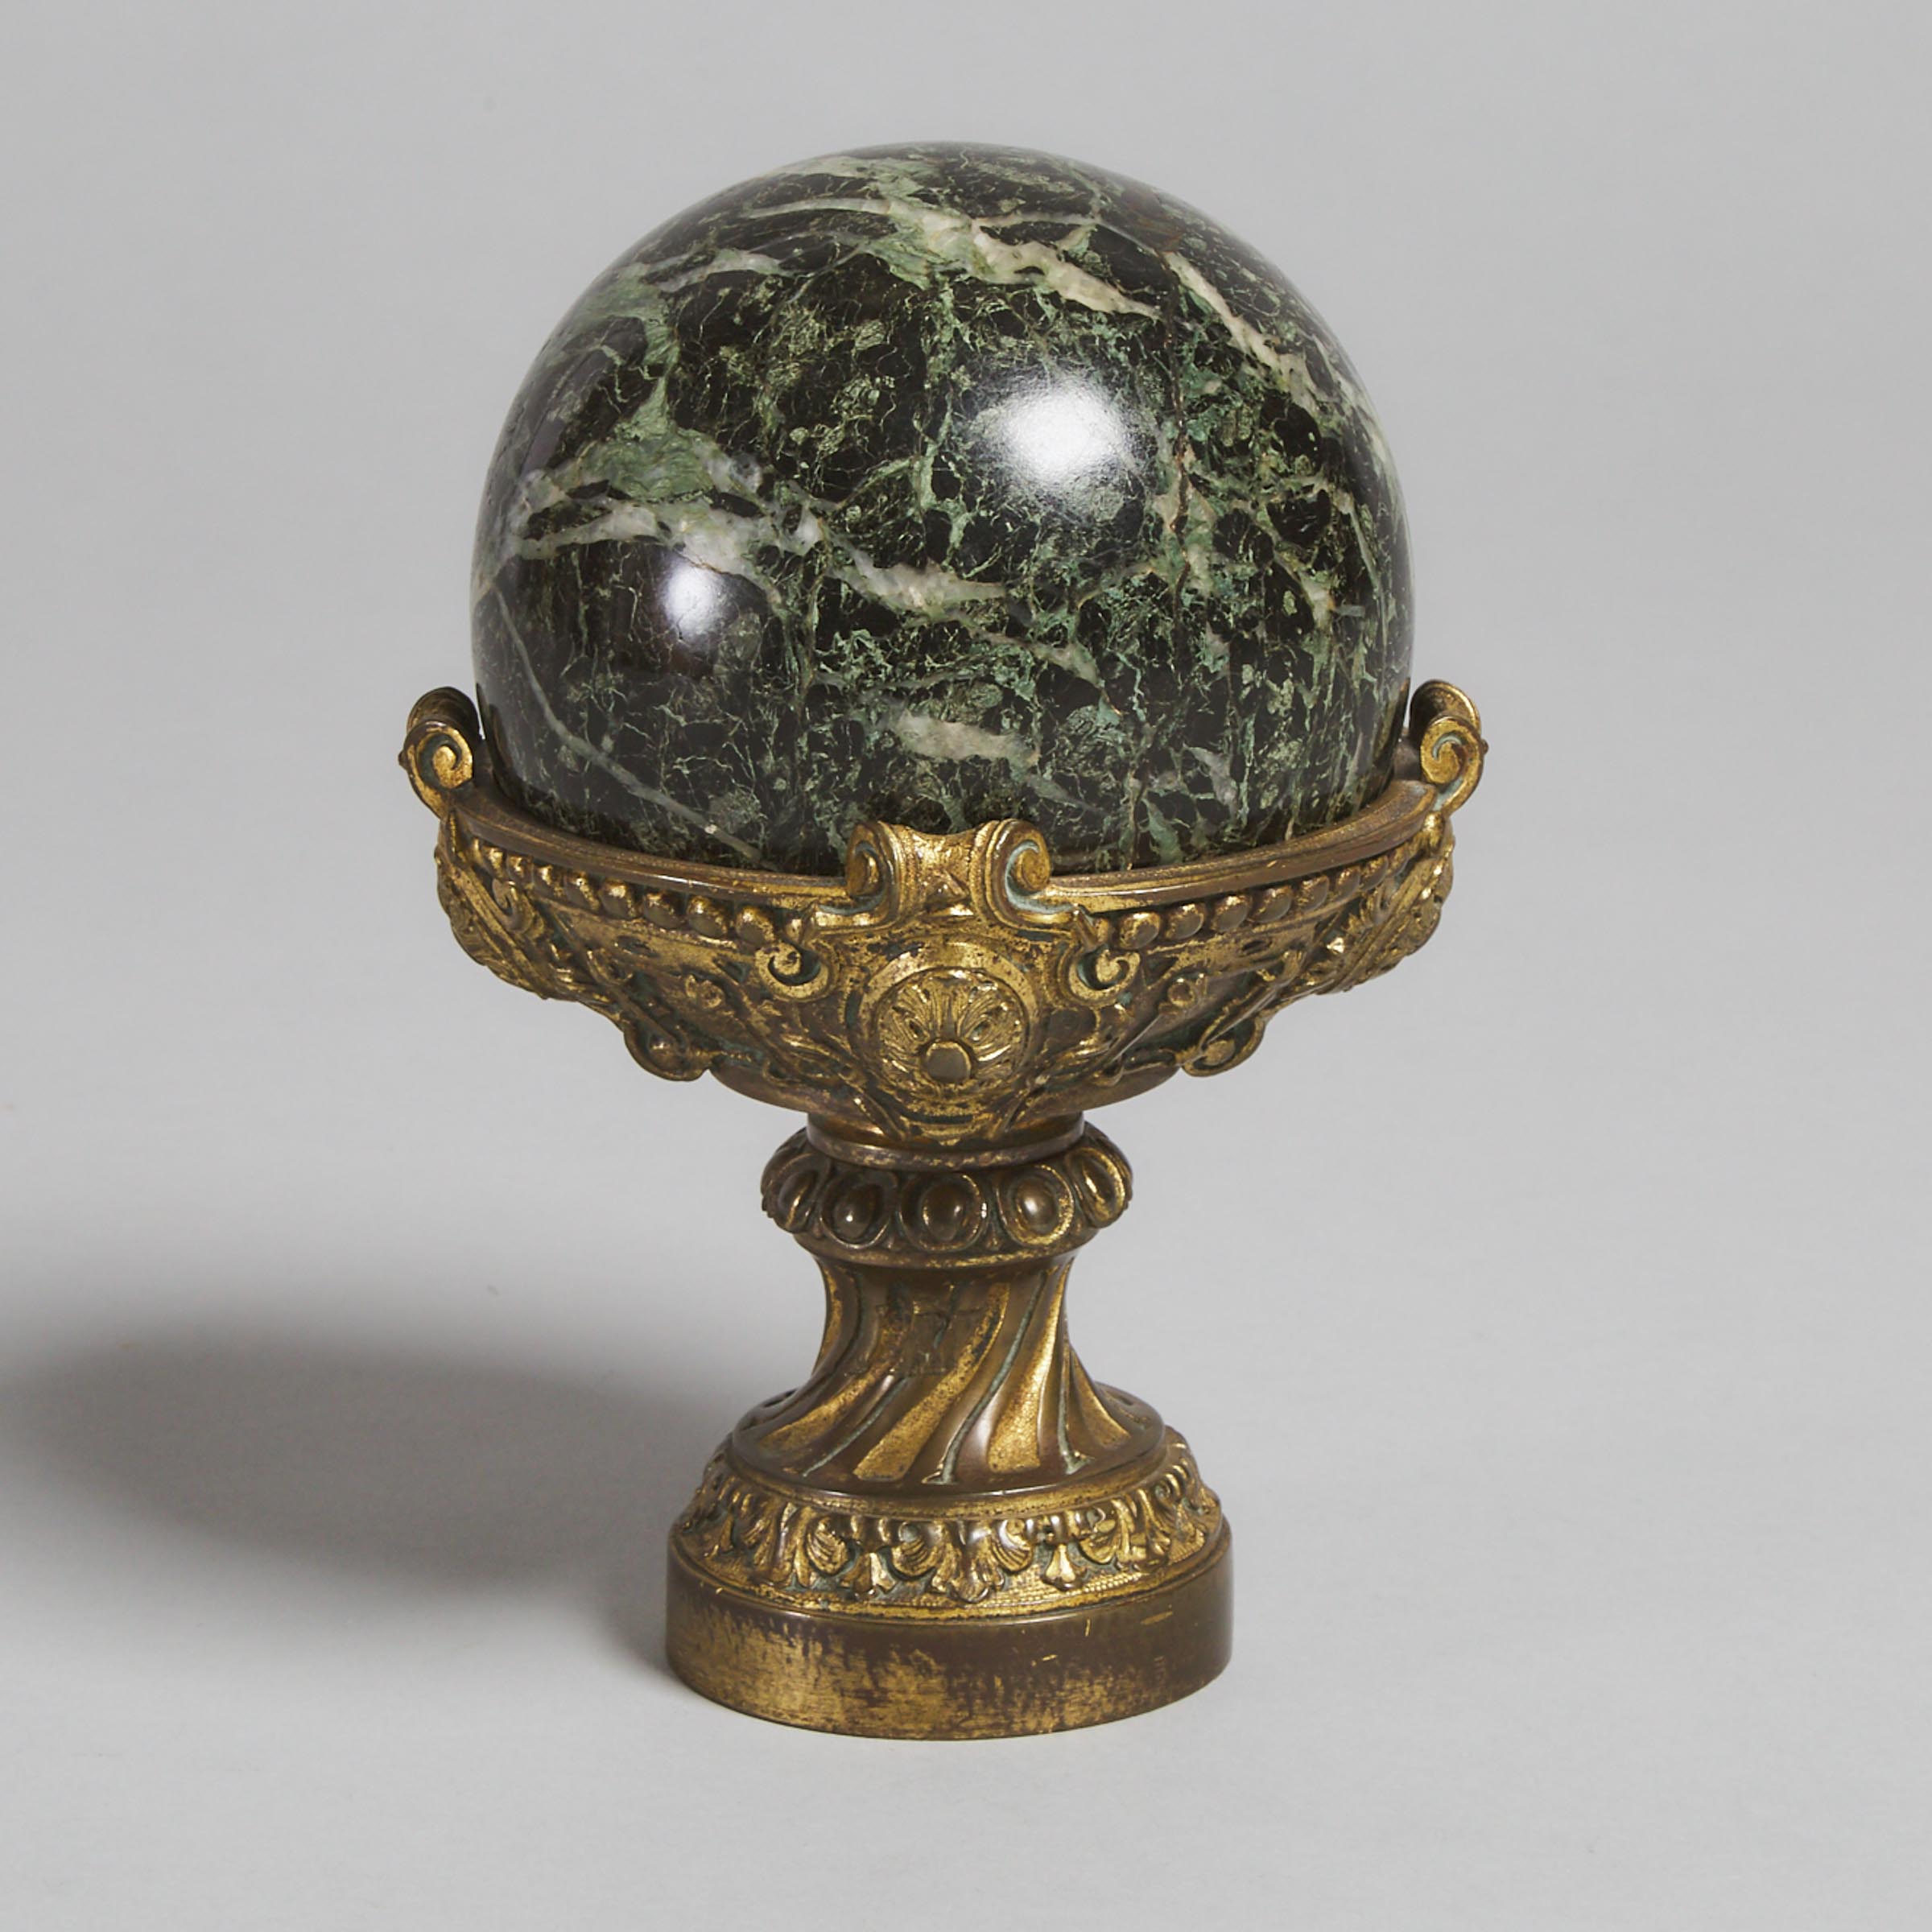 French Verde Antico Marble and Gilt Bronze Newel Post Finial, 19th century